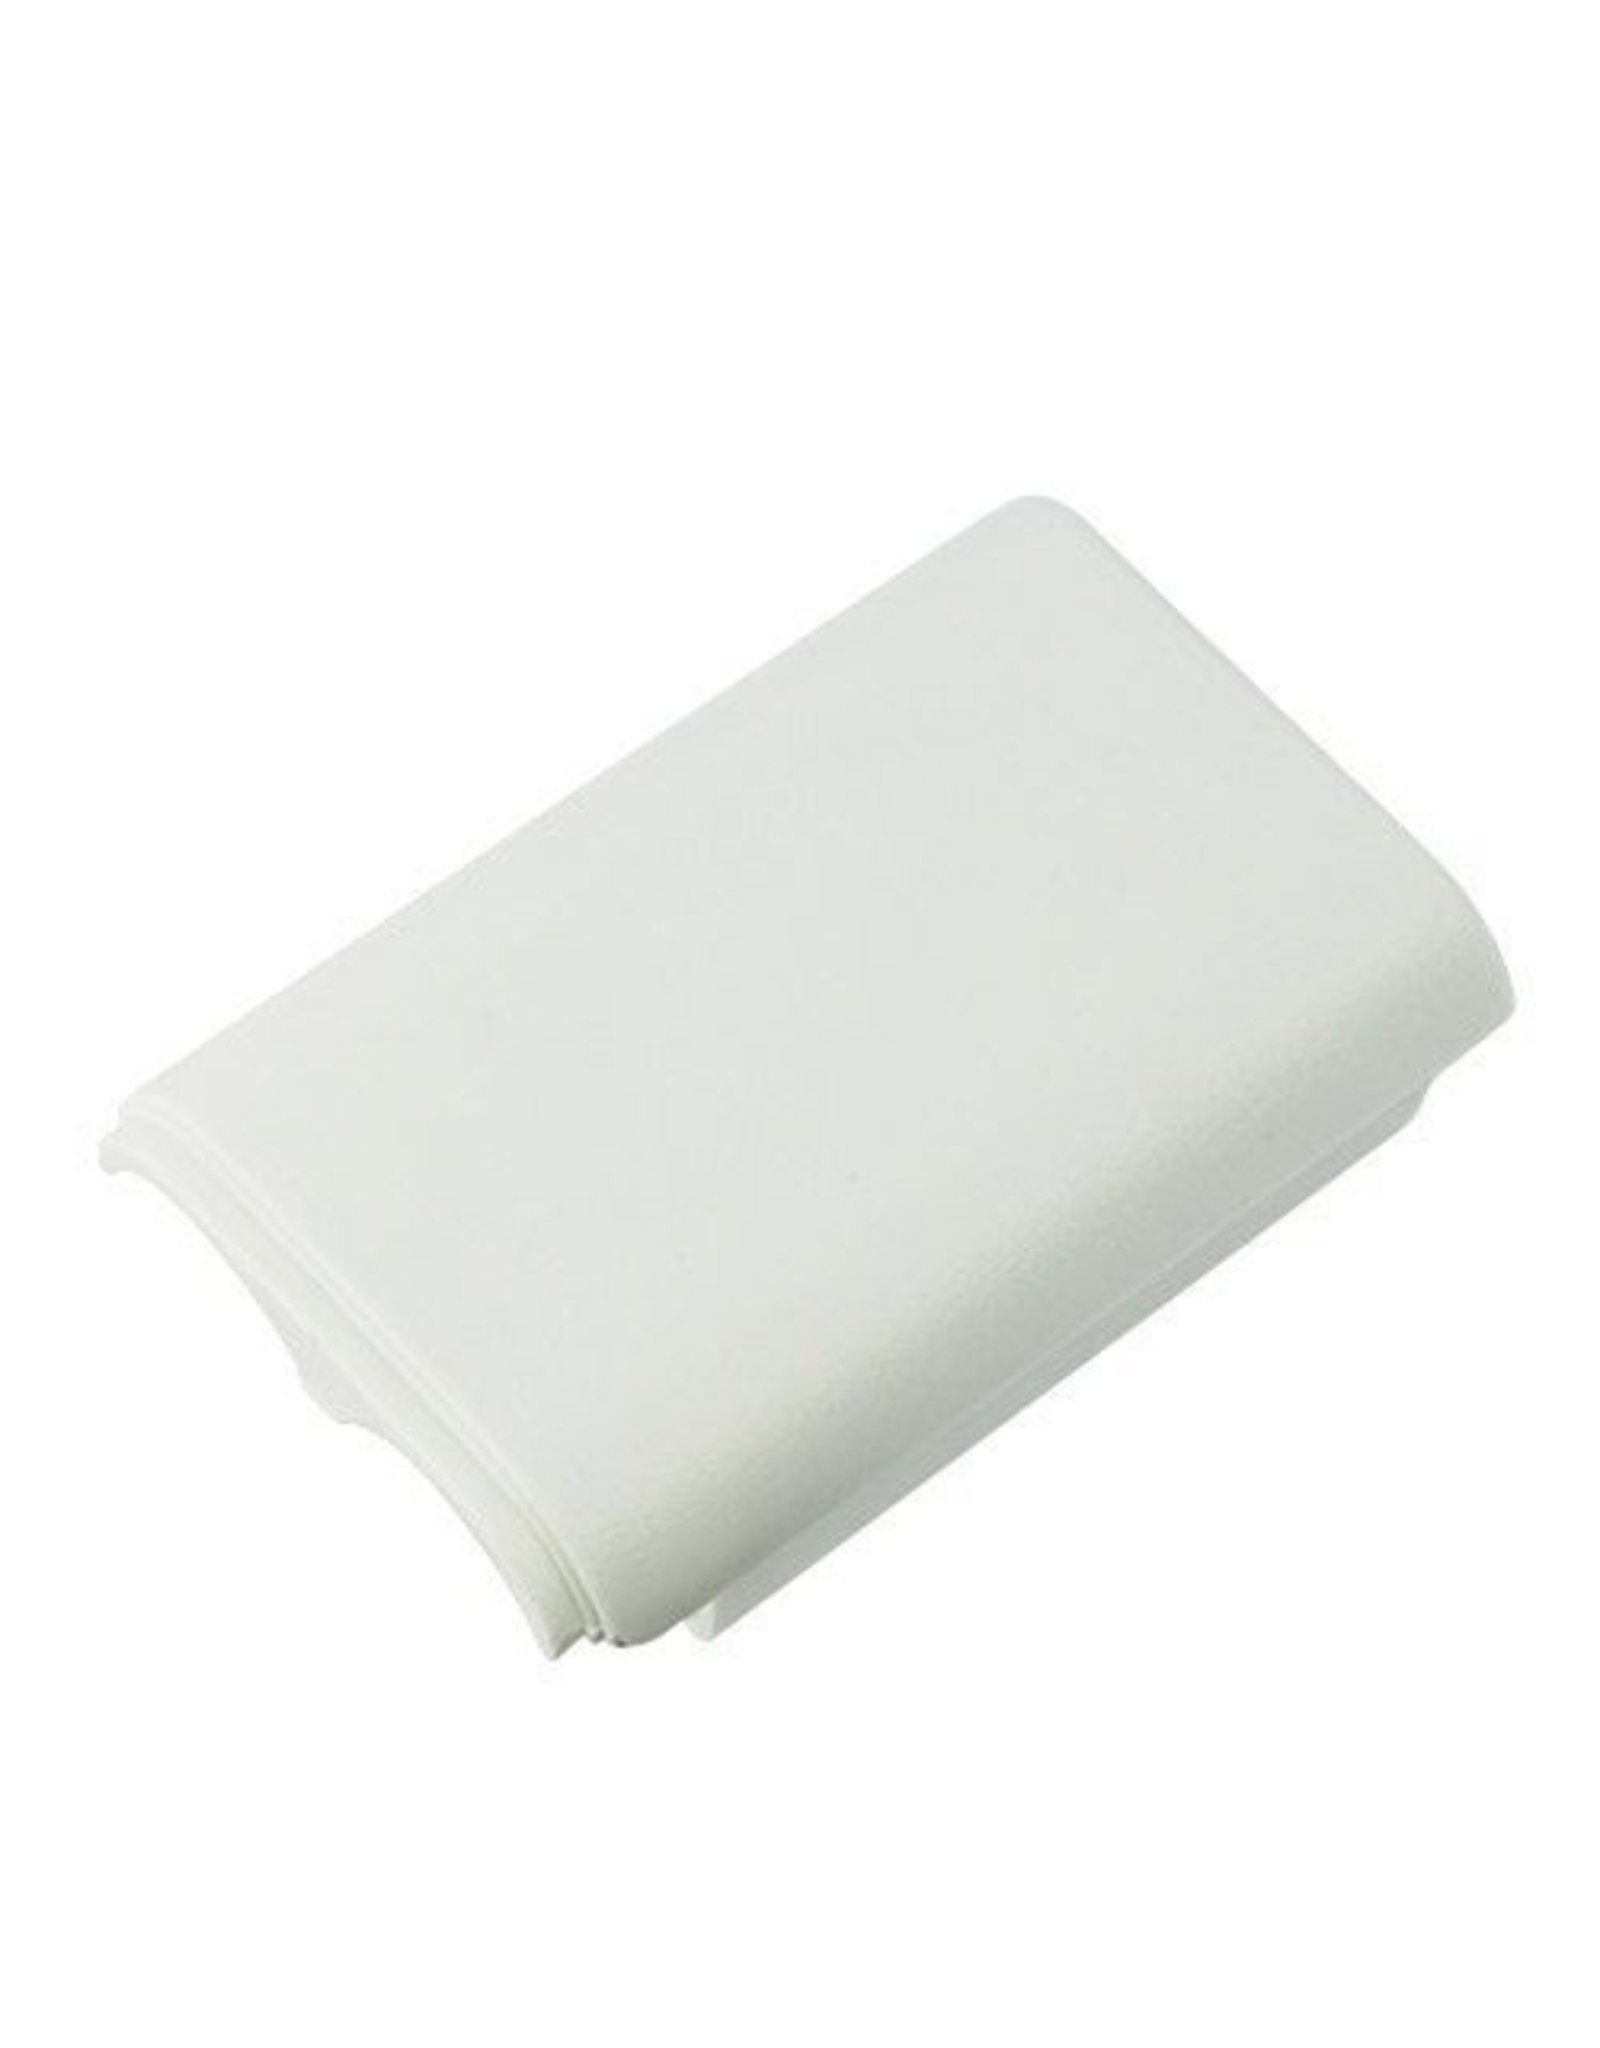 Xbox 360 Xbox 360 Controller Battery Cover - White, 3rd Party (Brand New)